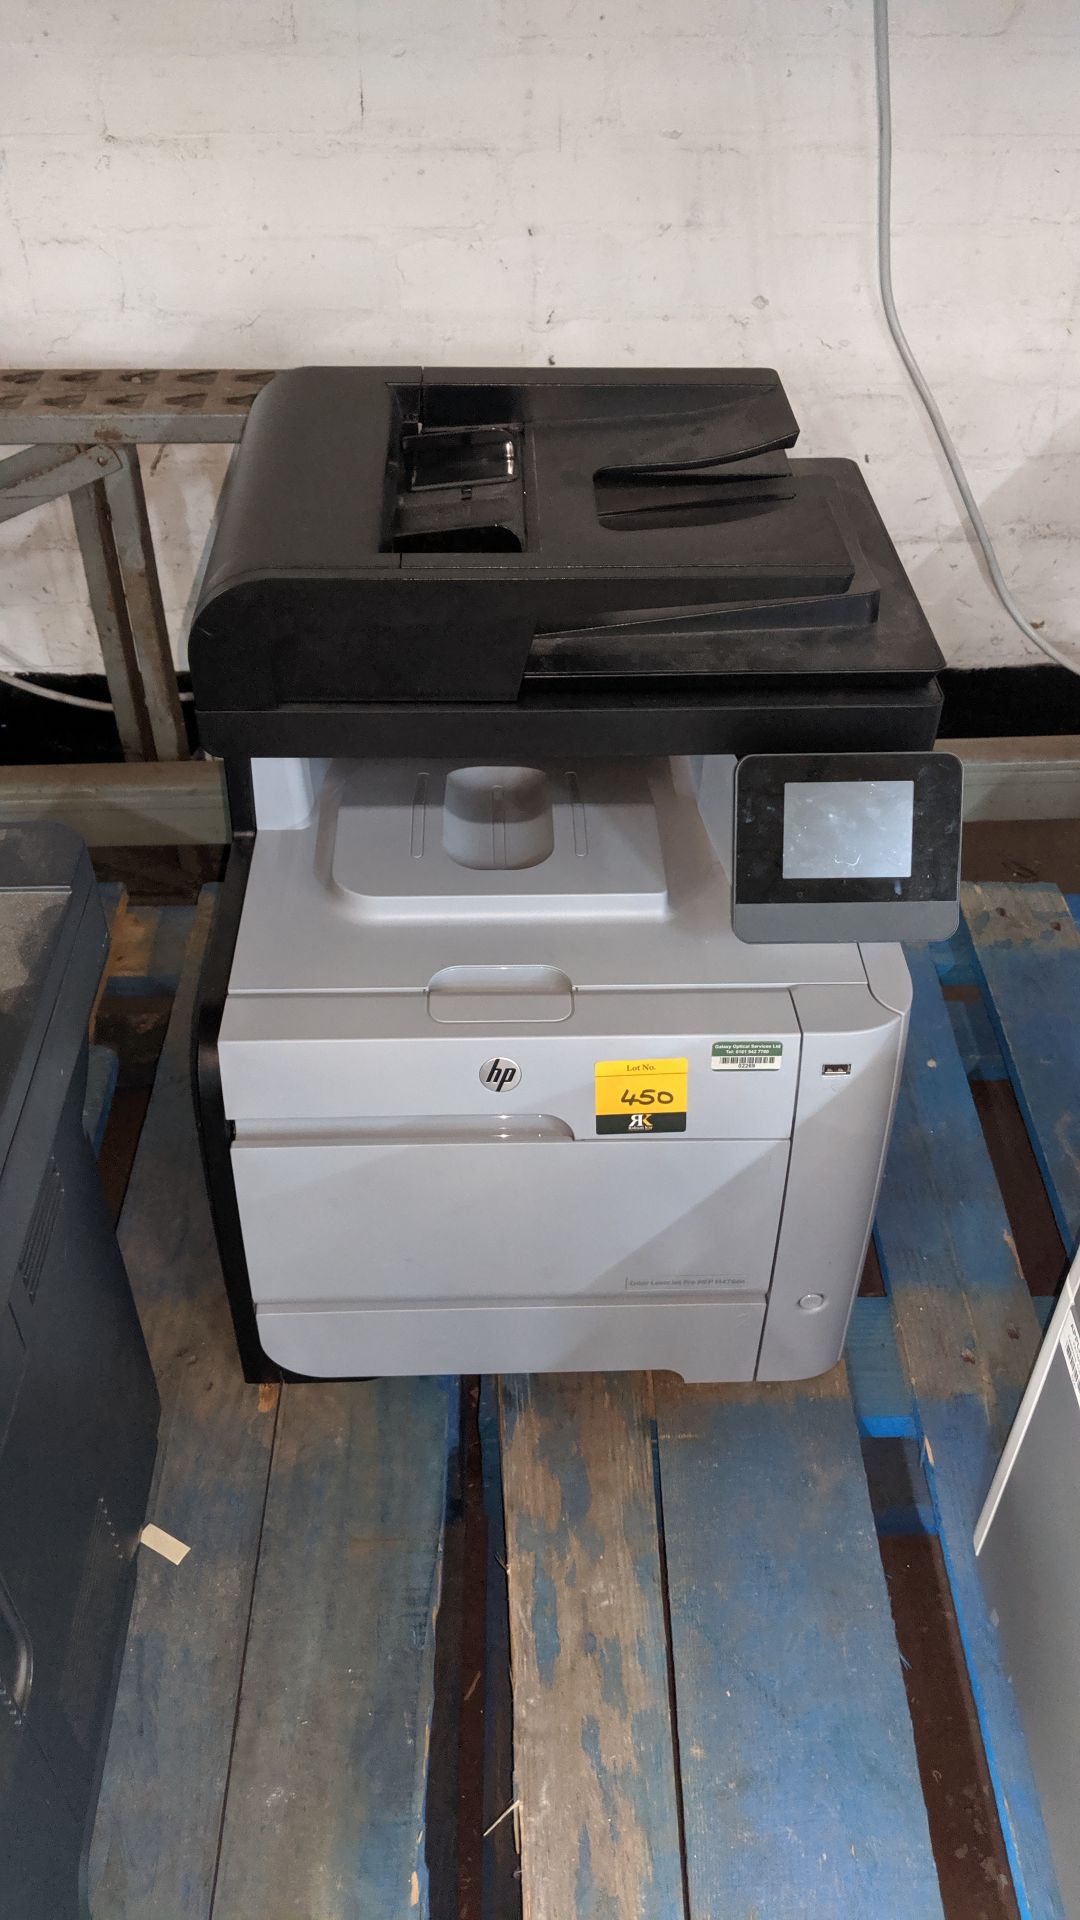 HP LaserJet Pro MFP M476DN multifunction printer. This is one of a large number of lots being sold